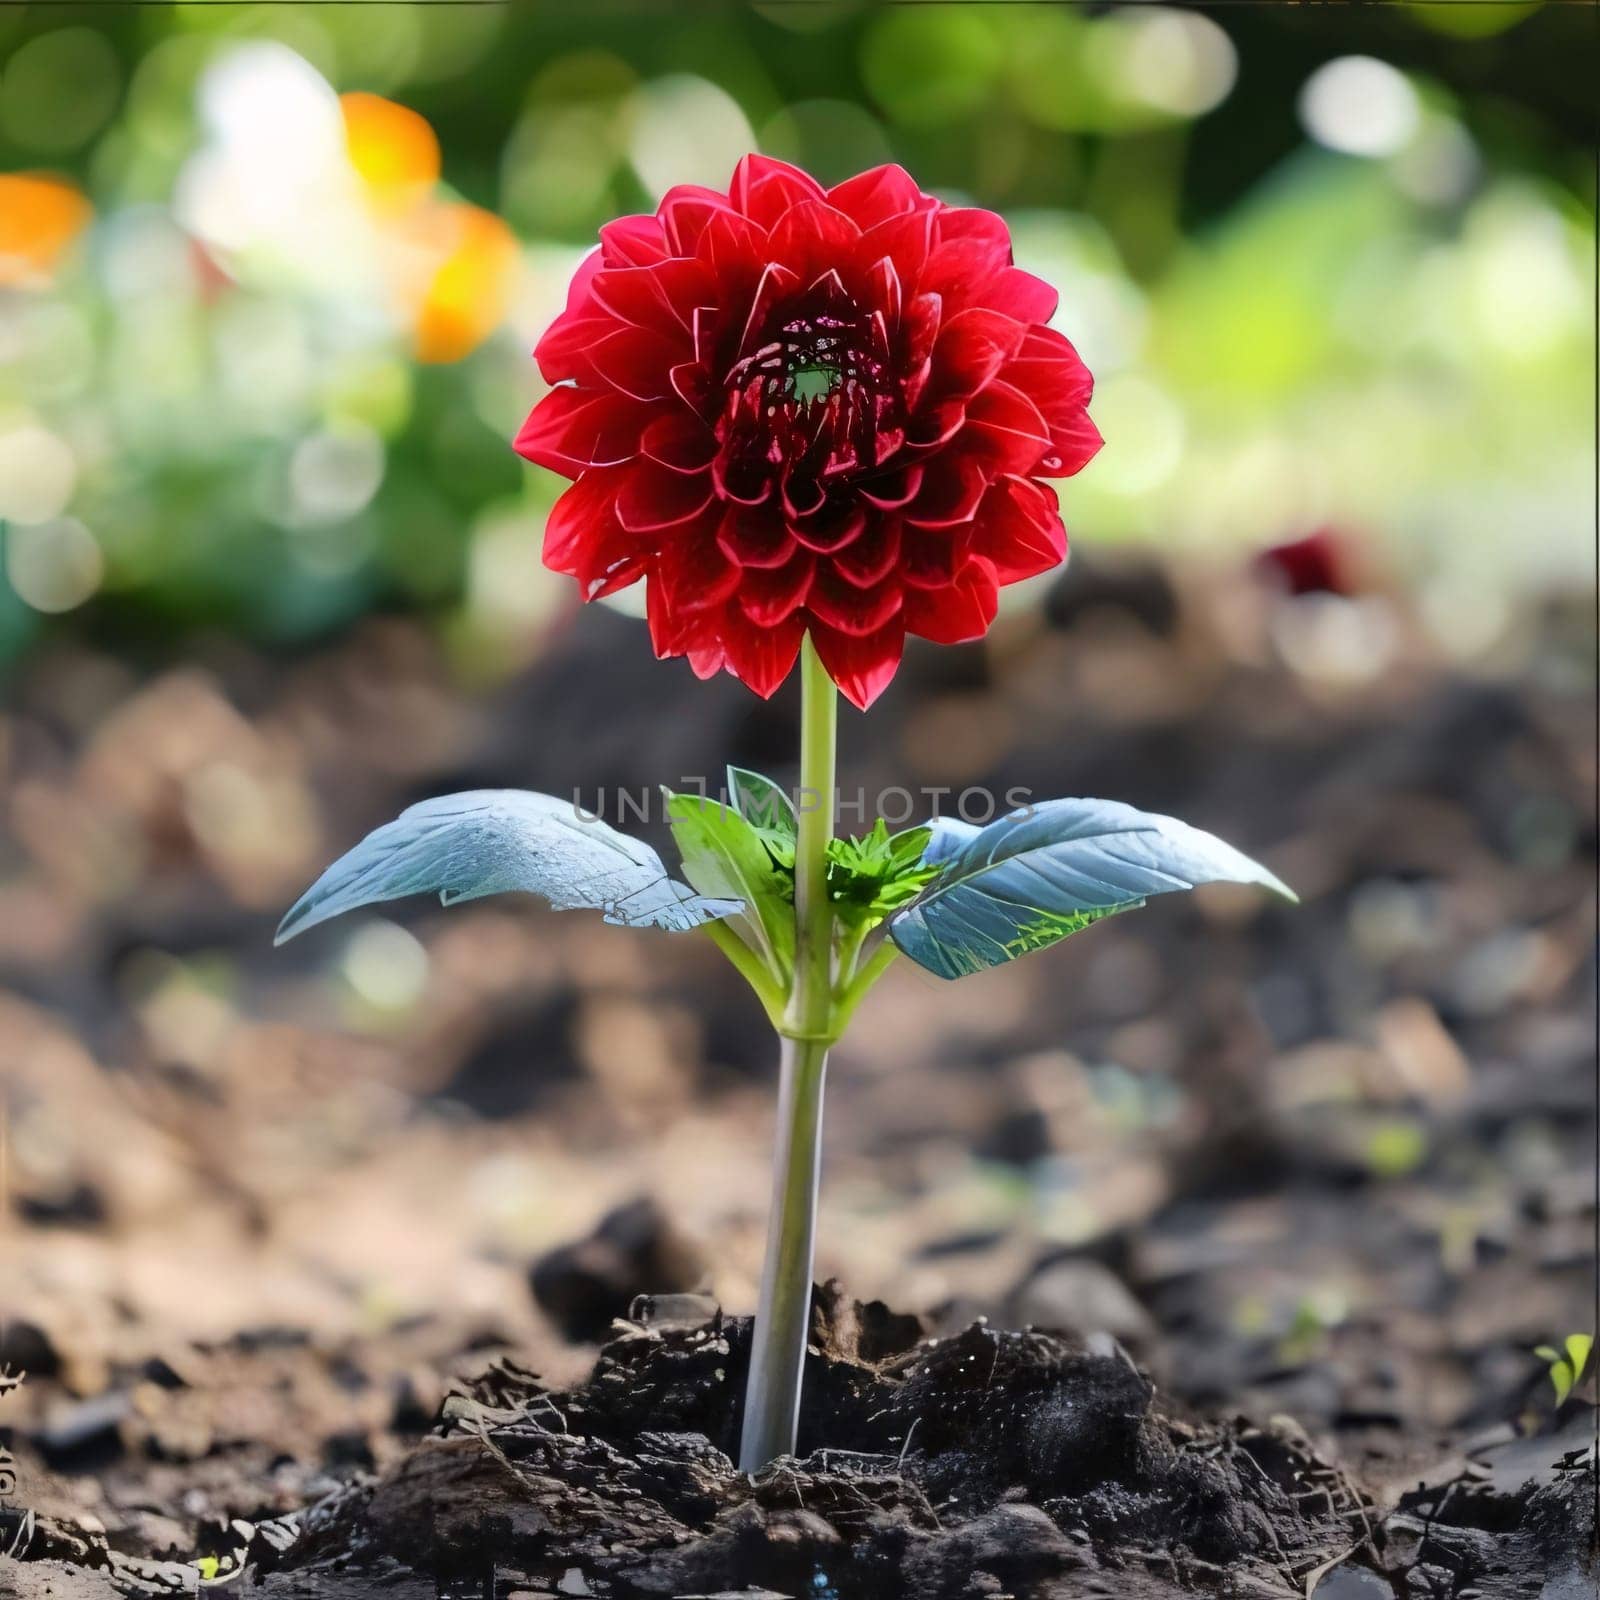 Red Dahlia planted in the ground on a smudged background. Flowering flowers, a symbol of spring, new life. by ThemesS